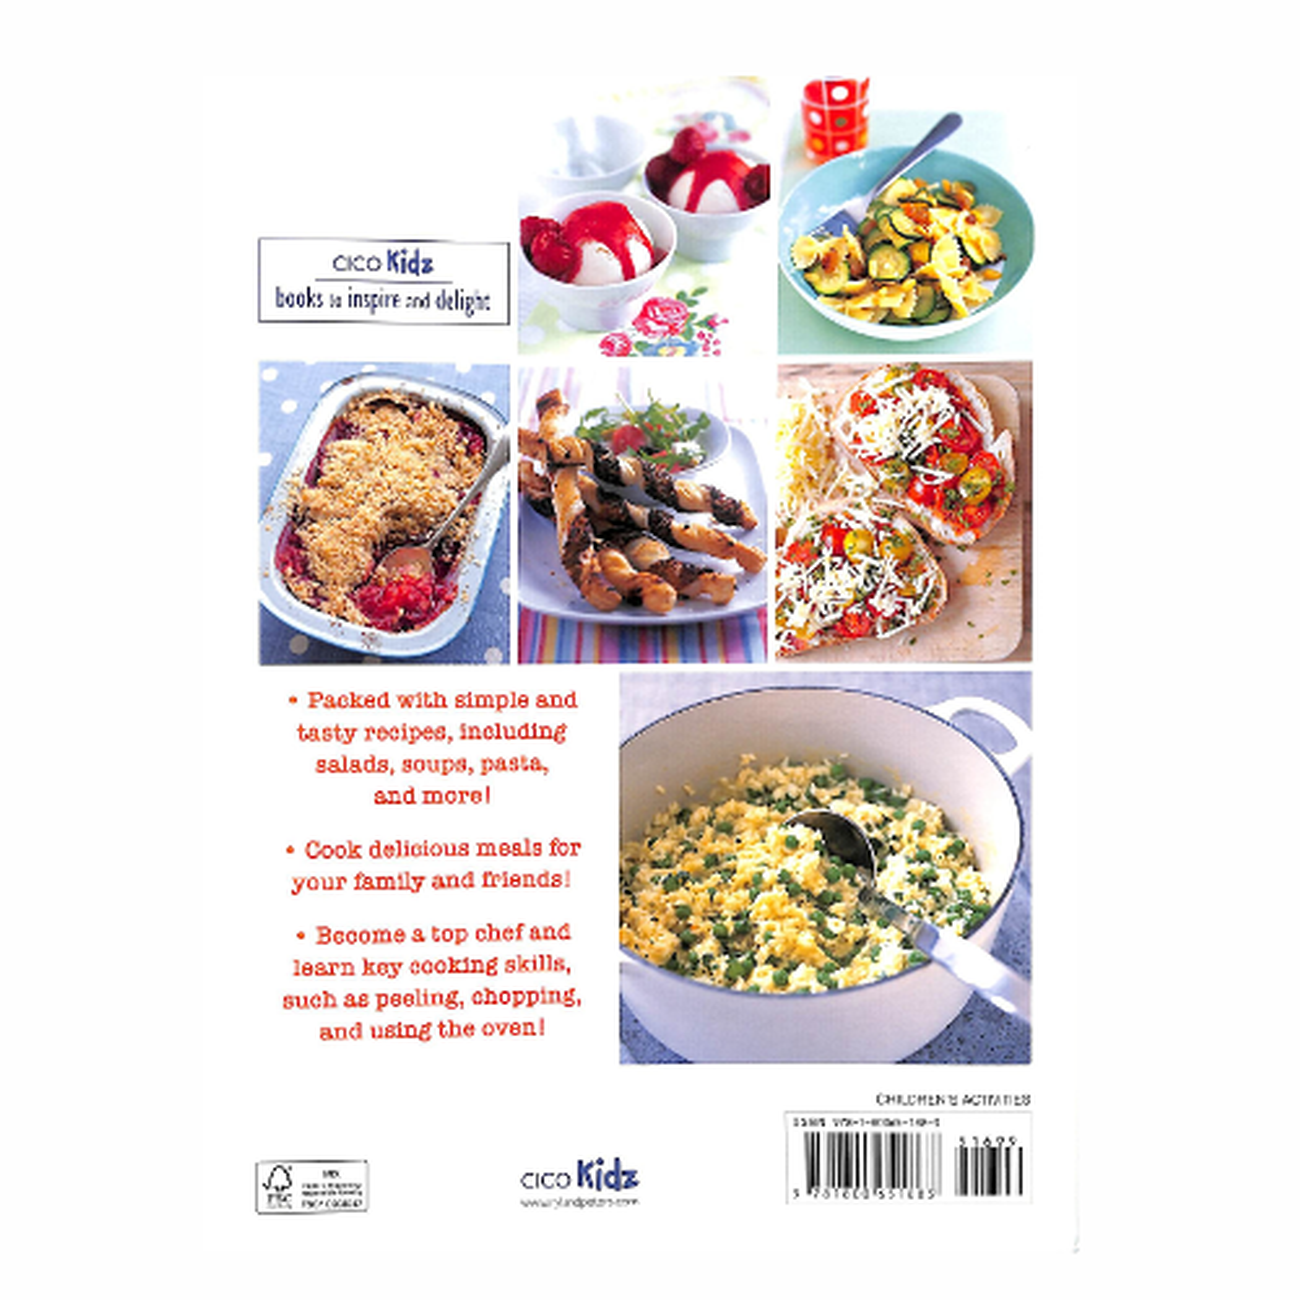 learn-to-cook-book-clare-sayer - Learn To Cook by Clare Sayer